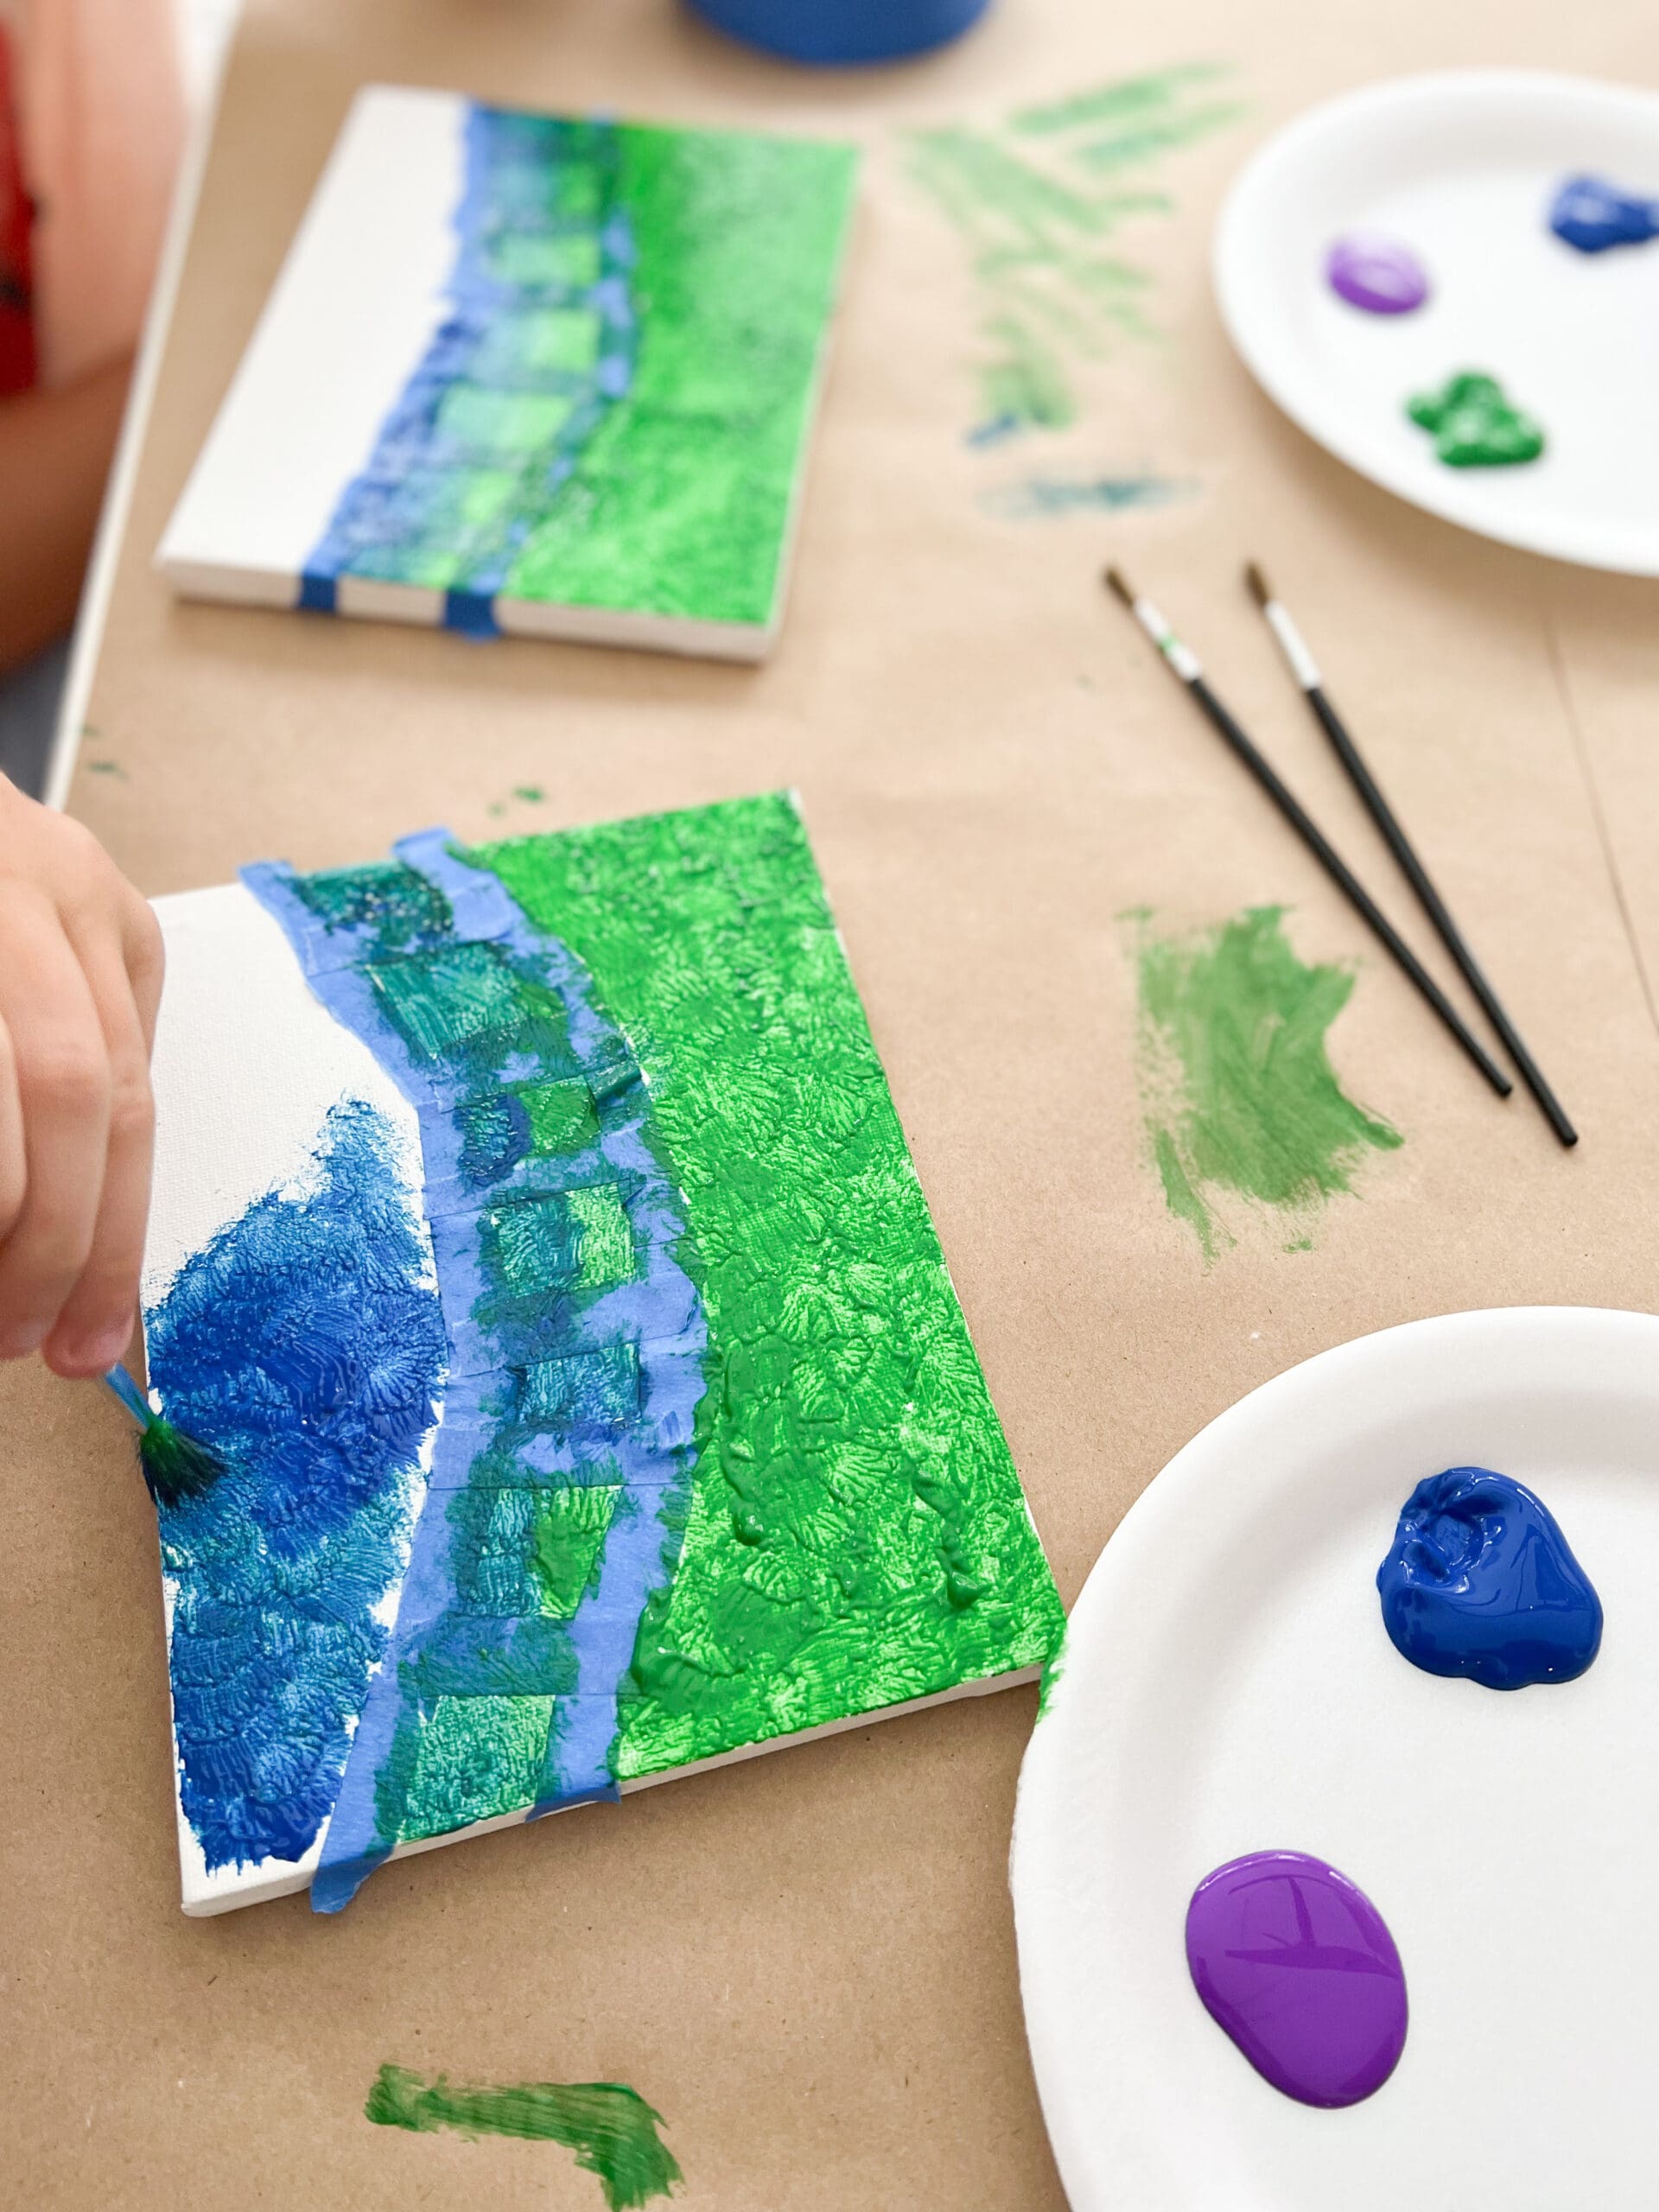 How to Make a Monet Inspired Painting with Kids - Robyn's French Nest